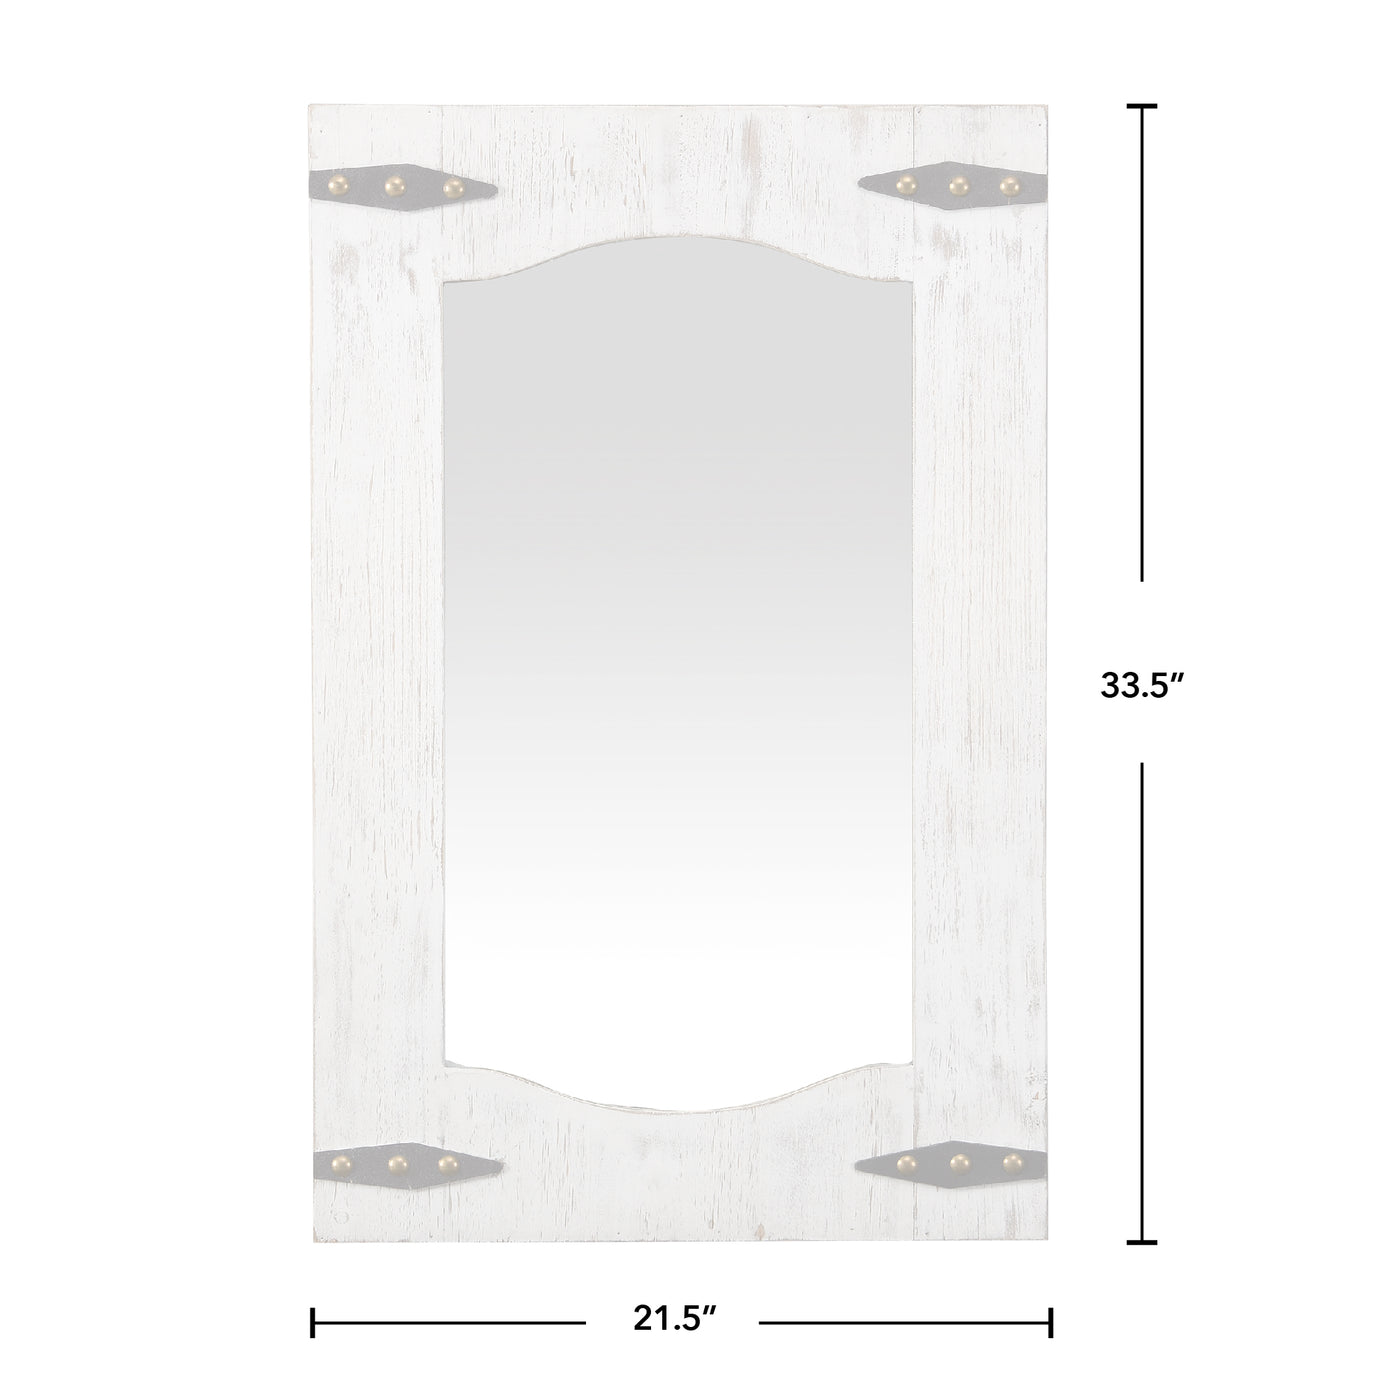 FirsTime & Co. Off-White Barn Door Wall Mirror, Farmhouse Style, Made of Wood